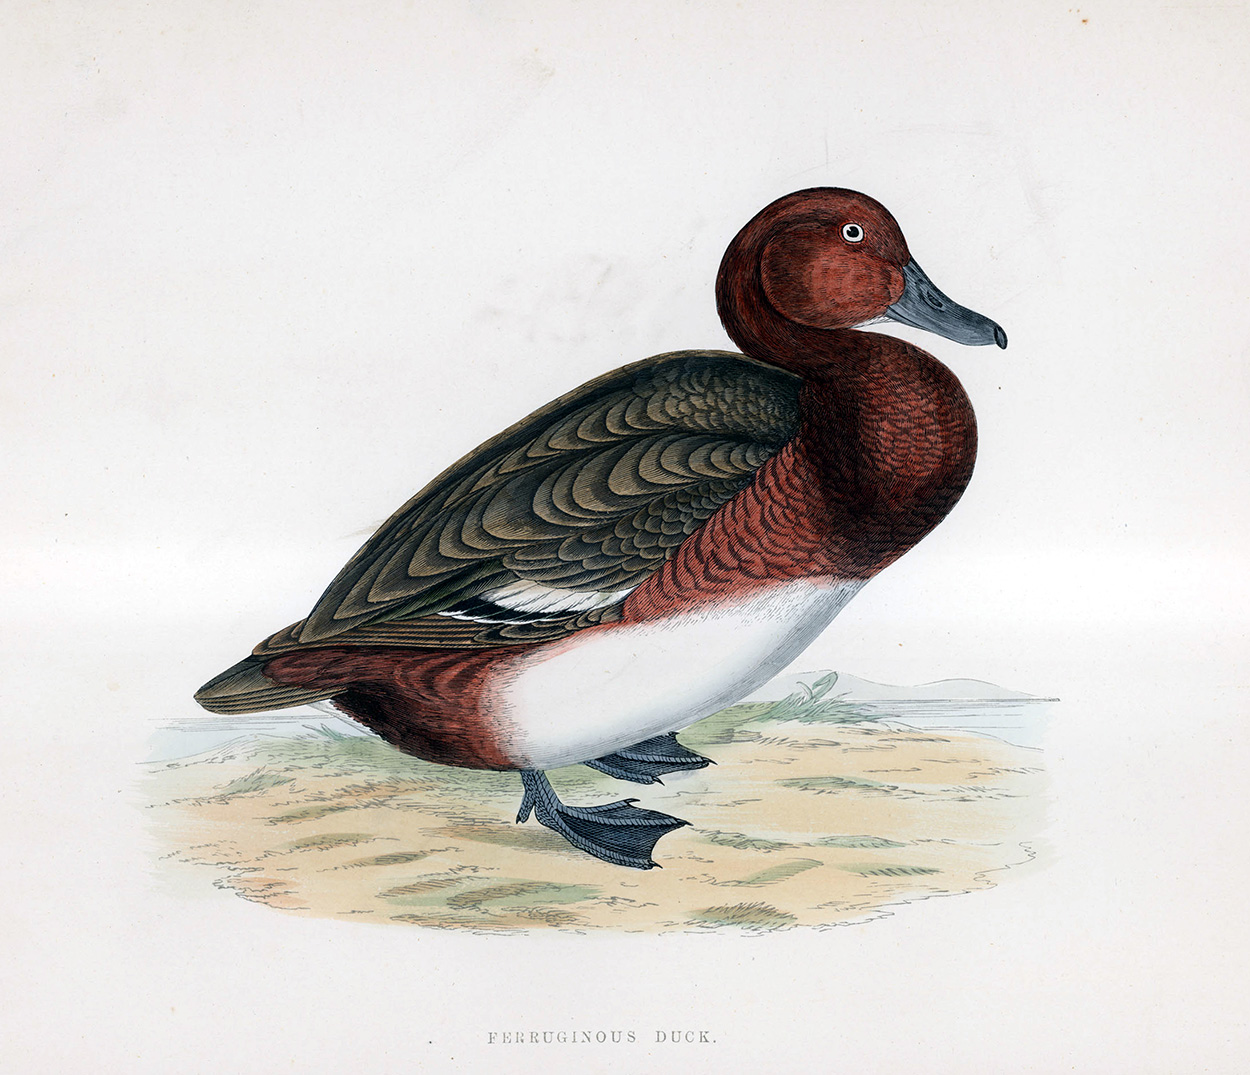 Ferruginos Duck - hand coloured lithograph 1891 (Print) art by Beverley R Morris Art at The Illustration Art Gallery